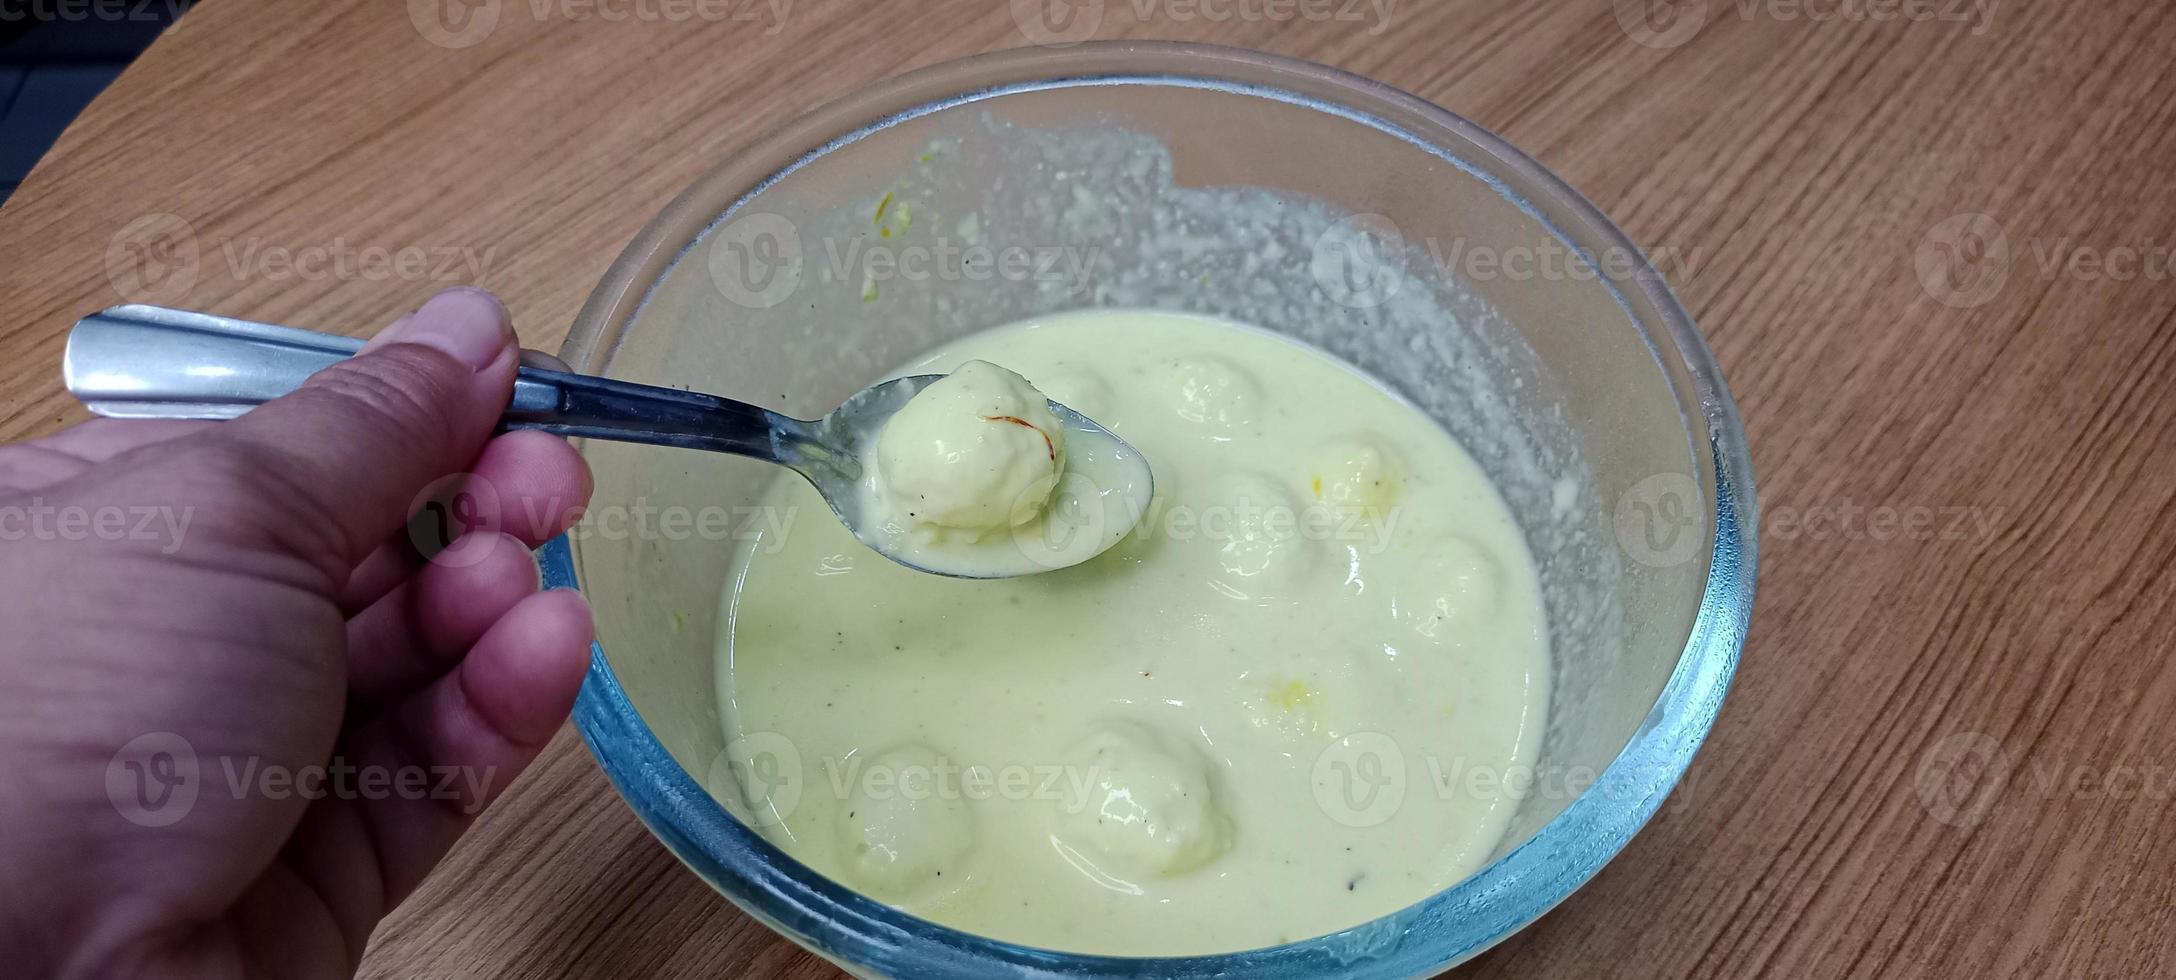 Rasmalai, Rossomalai, Roshmolai, Rasamalei is a very popular Indian dessert. It's a Similar dish to Rasgulla. It is a sweet delicacy made with Indian cottage cheese or chenna photo